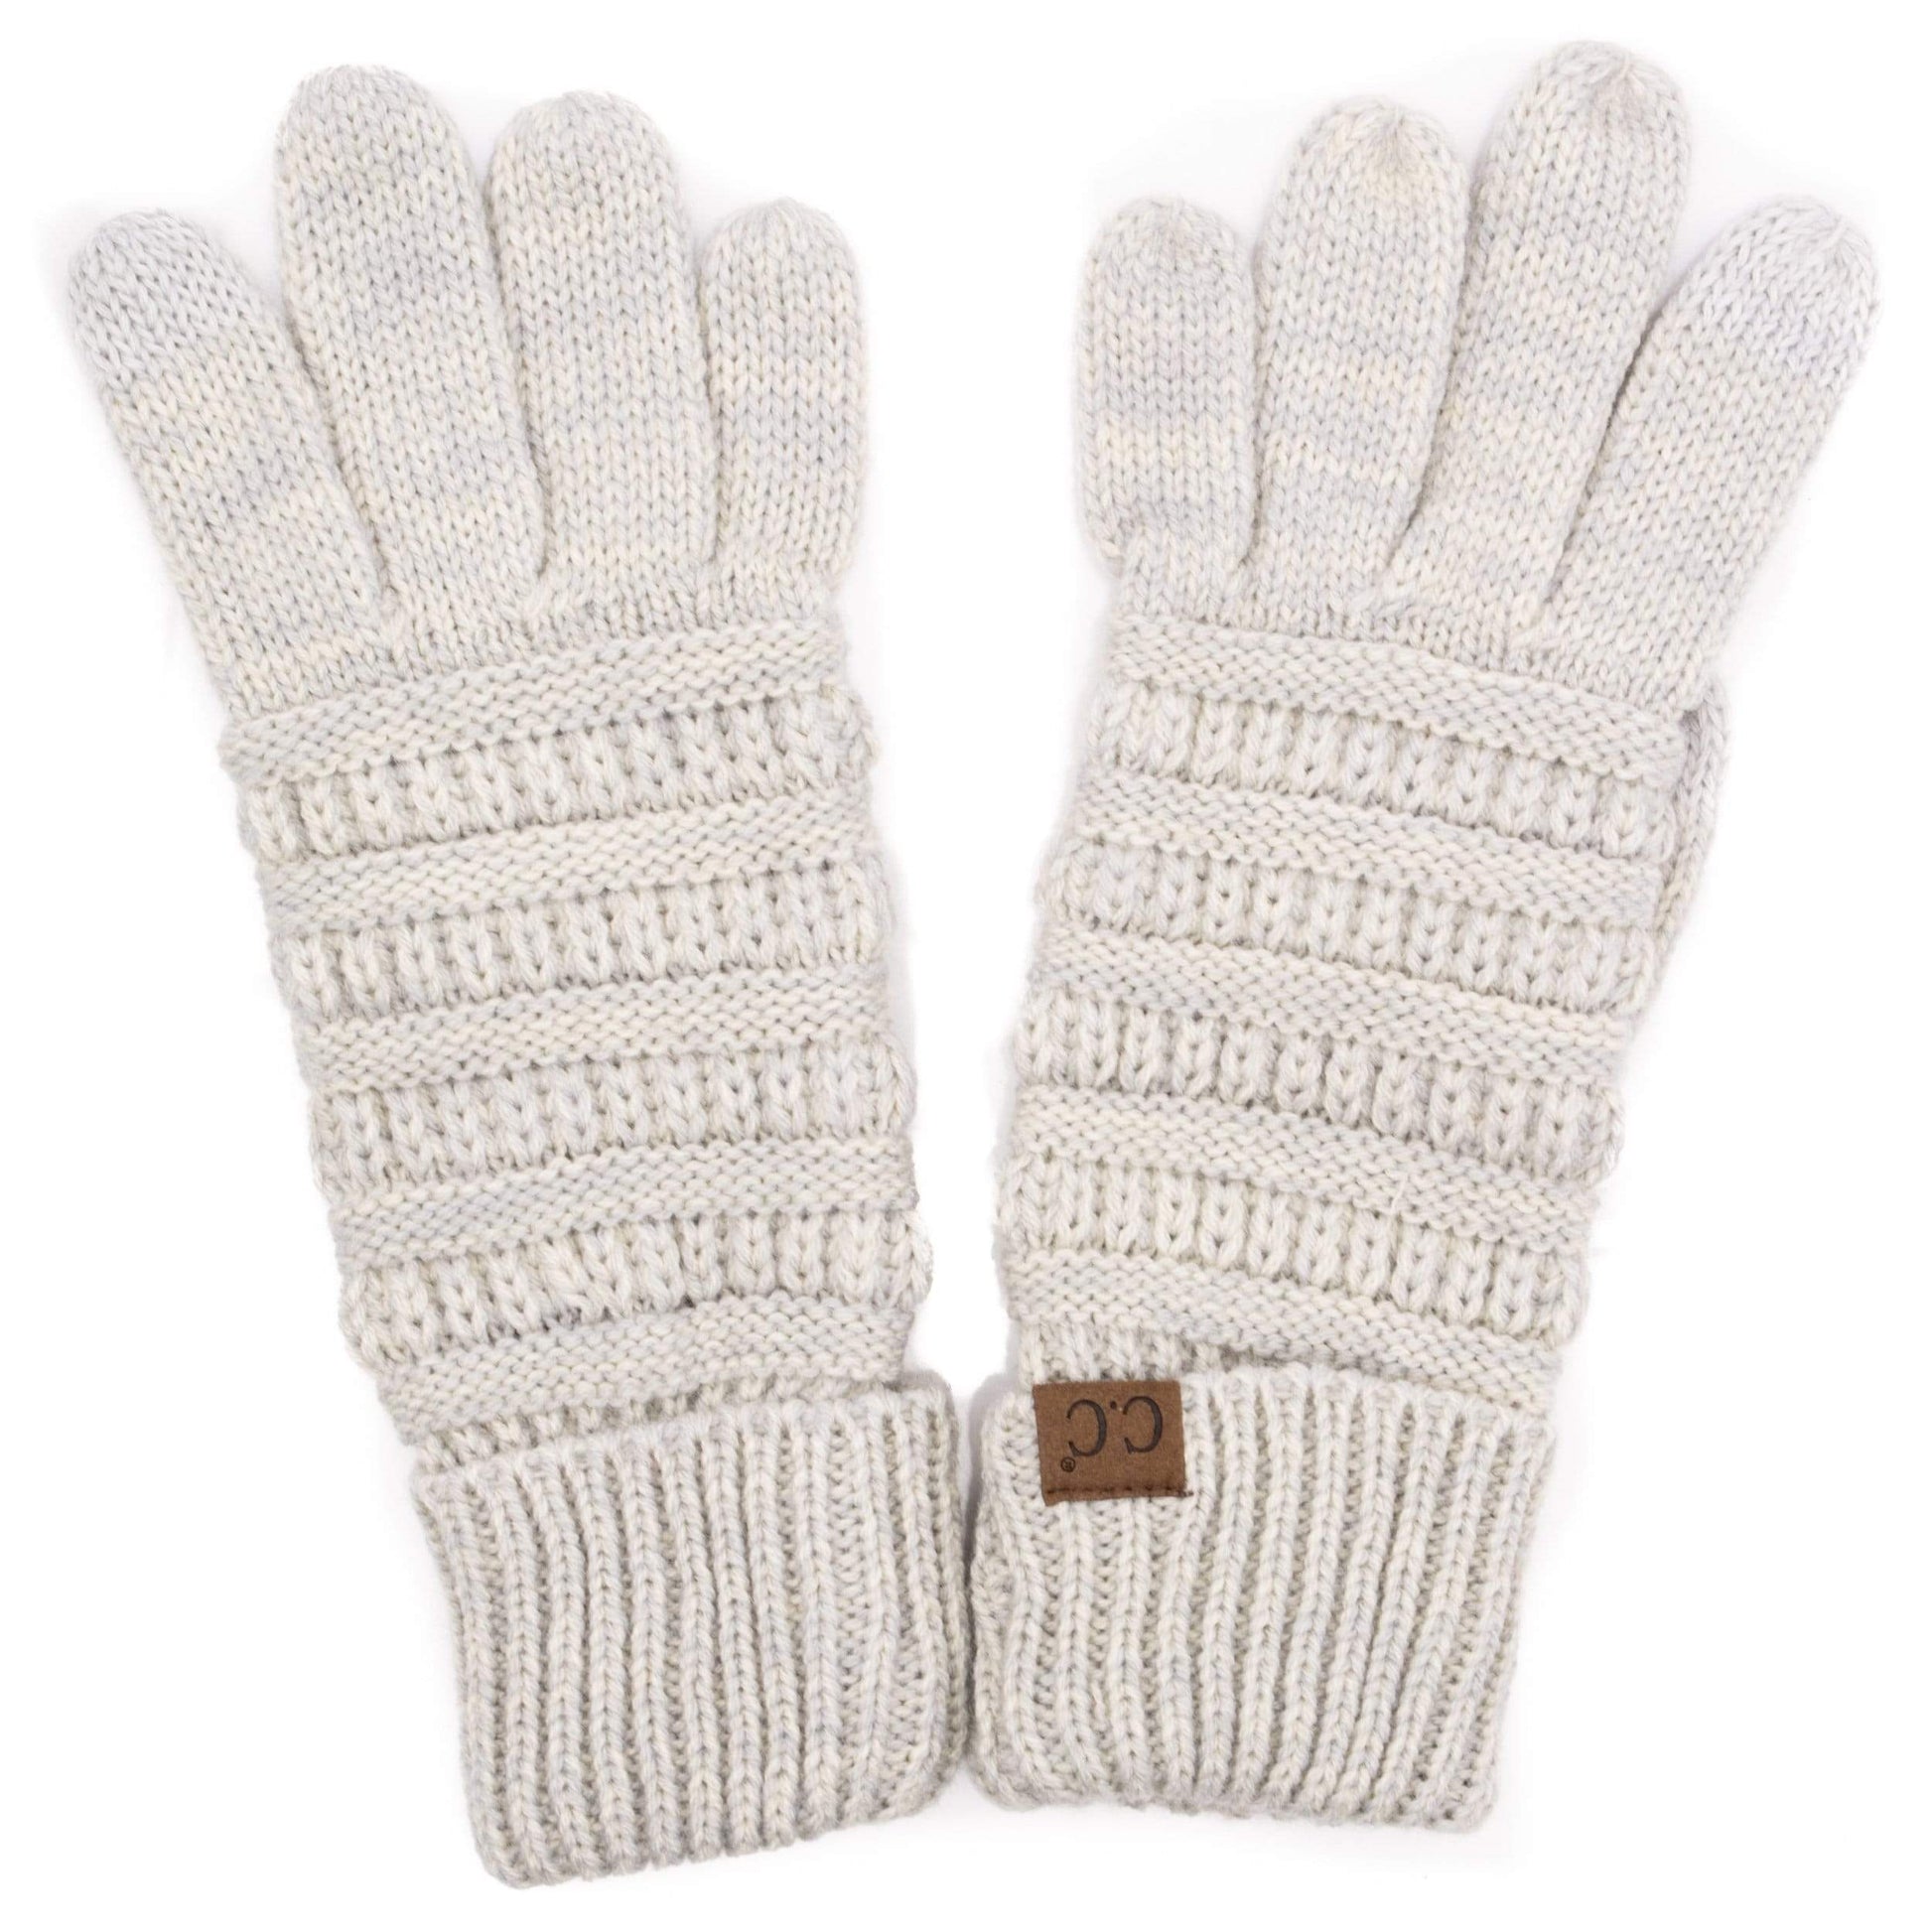 C.C Apparel Two Tone Lt Grey C.C Unisex Cable Knit Winter Warm Anti-Slip Two-Toned Touchscreen Texting Gloves